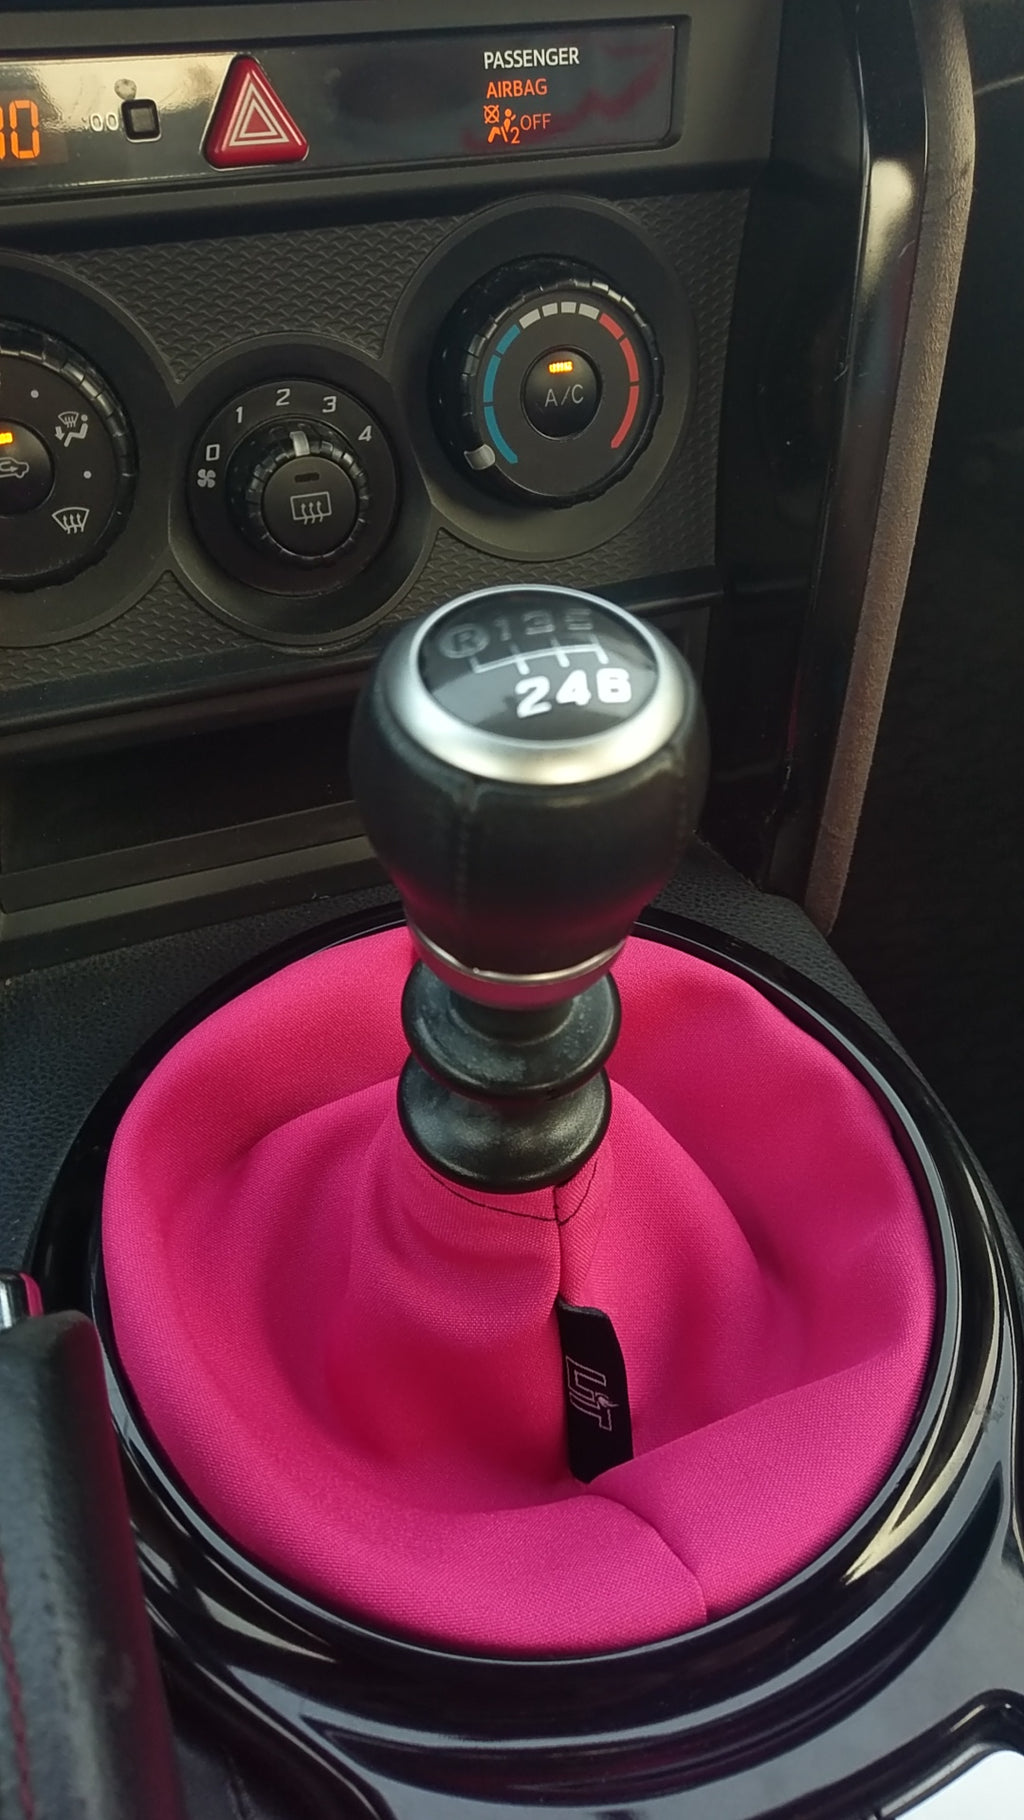 pink shift boot , shift boot cover , shift boot cover for automatic , shift boot  wrx , shift boot cover gt86 , shift boot and ebrake boot , gear shift boot cover , jdm shift boot cover , gt86 shift boot , brz shift boot , sti shift boot , gtr shift boot , supra shift boot , silvia s13 shift boot , silvia s14 shift boot , 350z shift boot cover , 370z shift boot , shift boot retainer , shift boot ring , shift boot for cars , evo shift boot cover , dsg shift boot cover , universal shift boot cover 